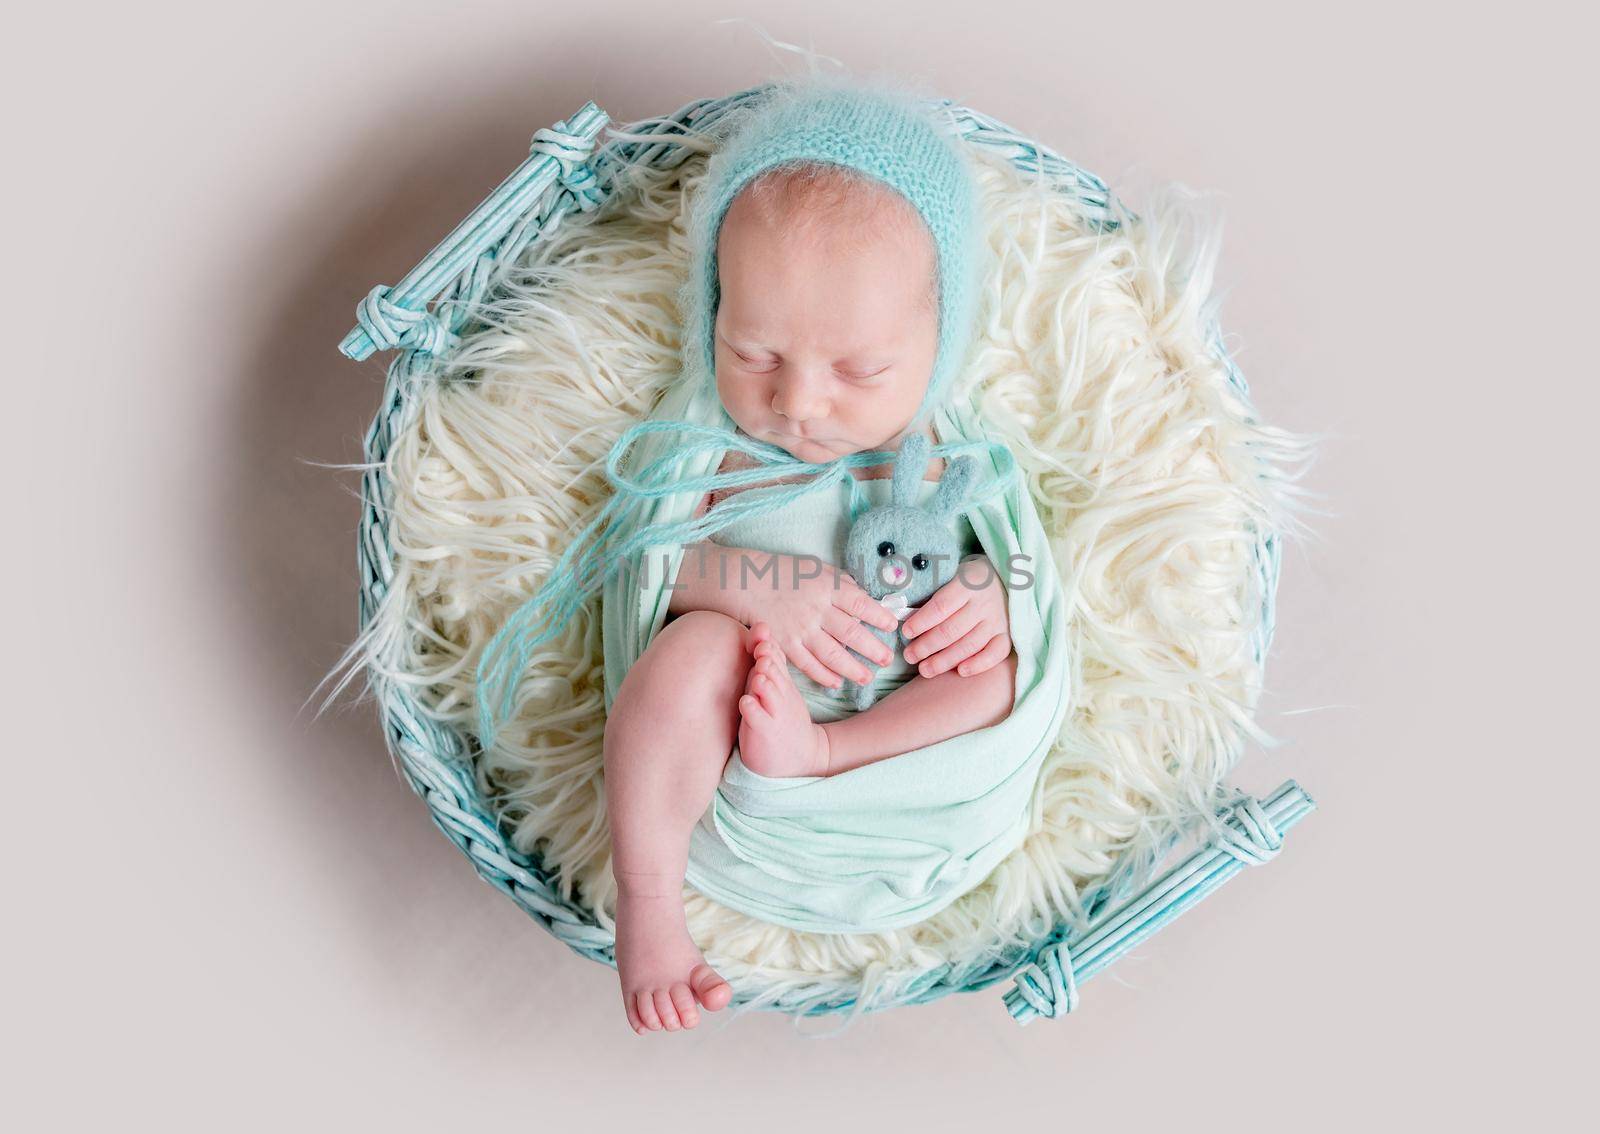 sweet newborn wrapped in a nappy sleeping on a round rug by tan4ikk1